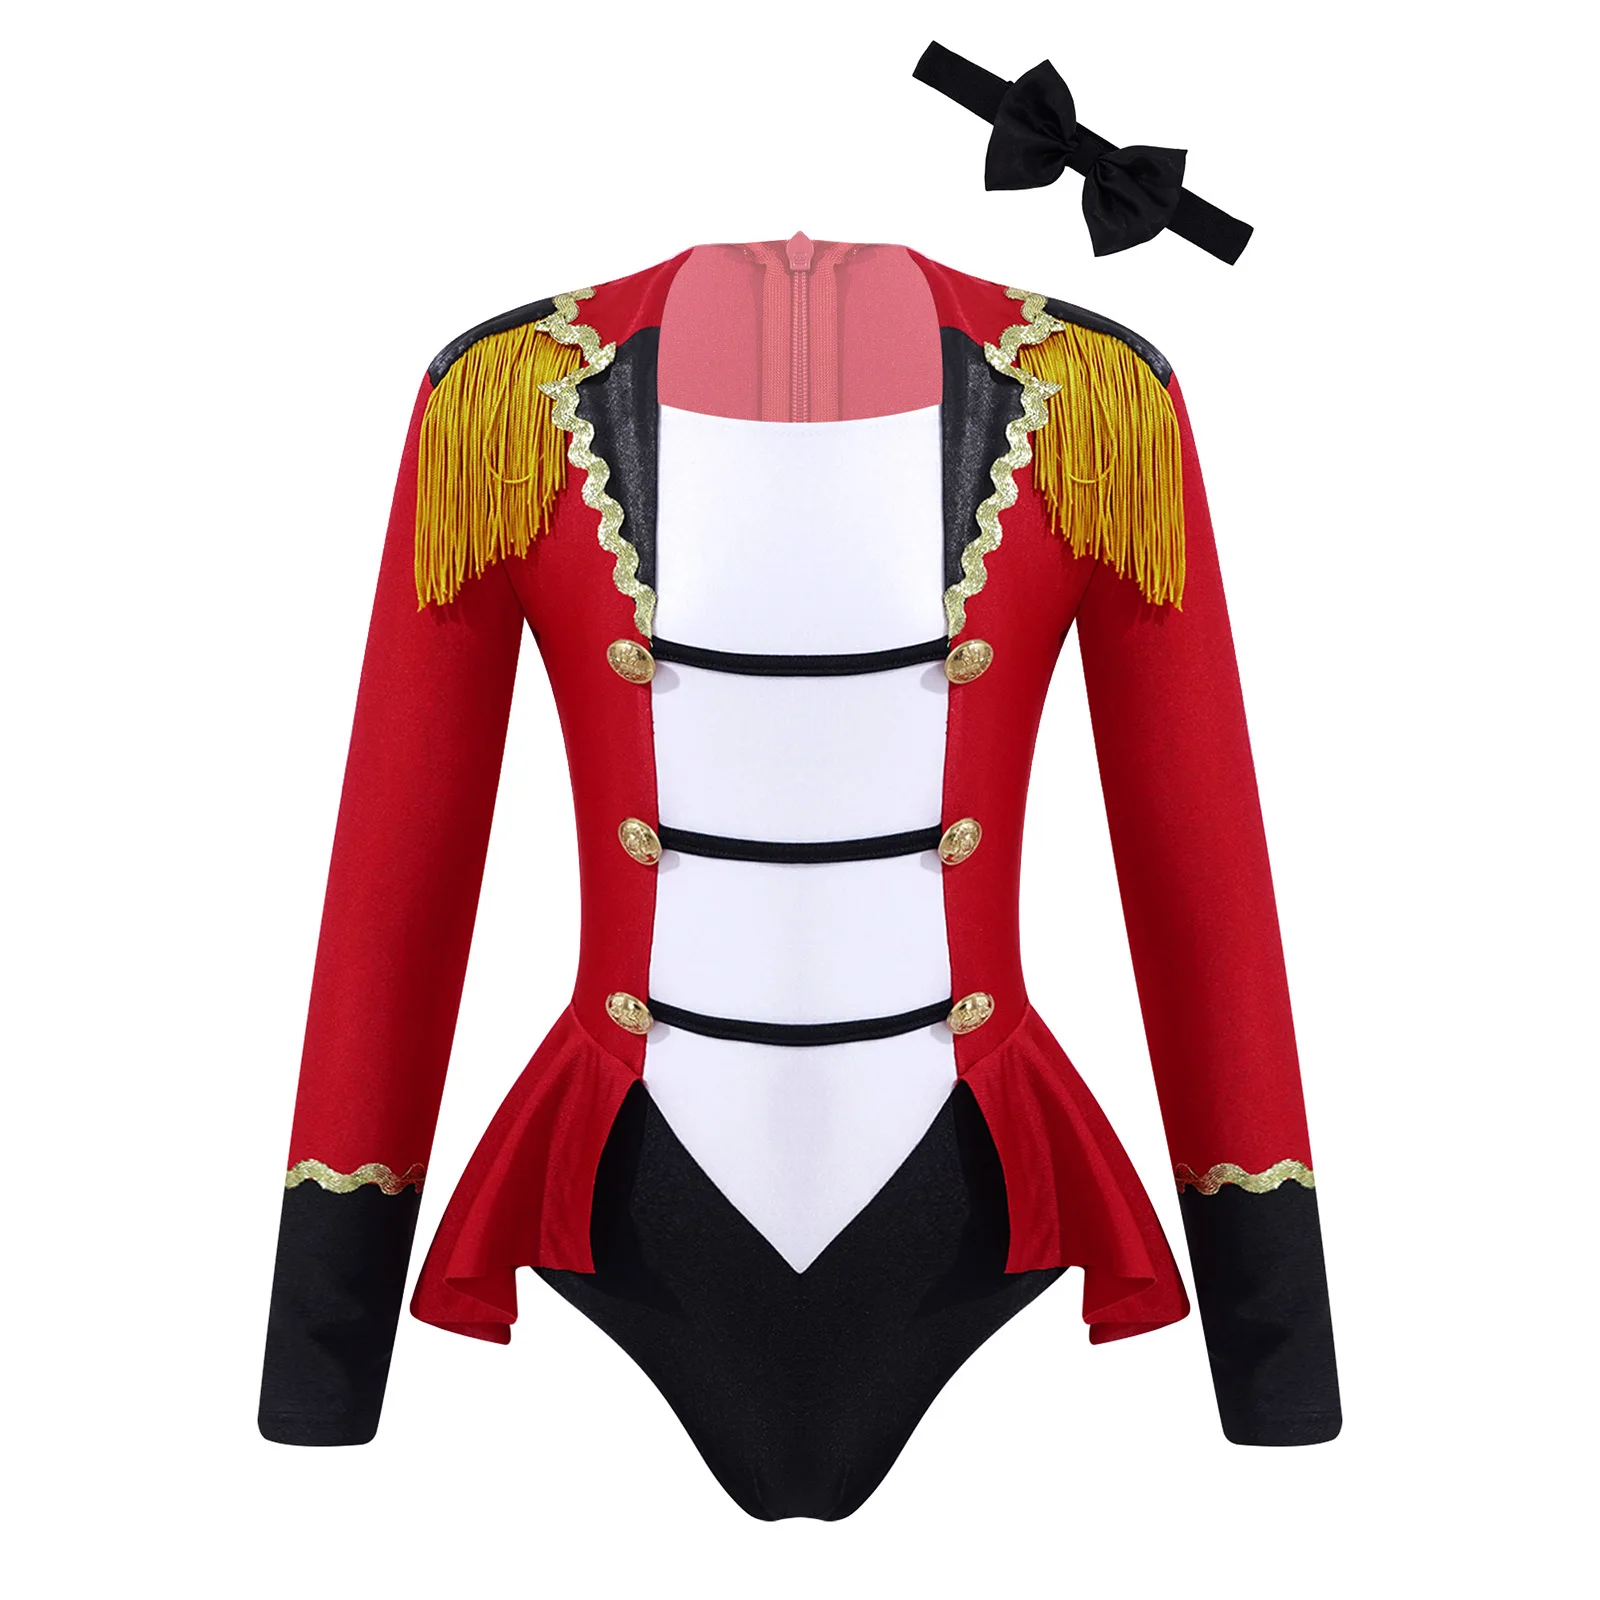 Купи Kids Girls Cosplay Circus Costume Long Sleeve Dance Leotard Jumpsuit With Tie Outfit For Role Play Party Stage Performance за 930 рублей в магазине AliExpress